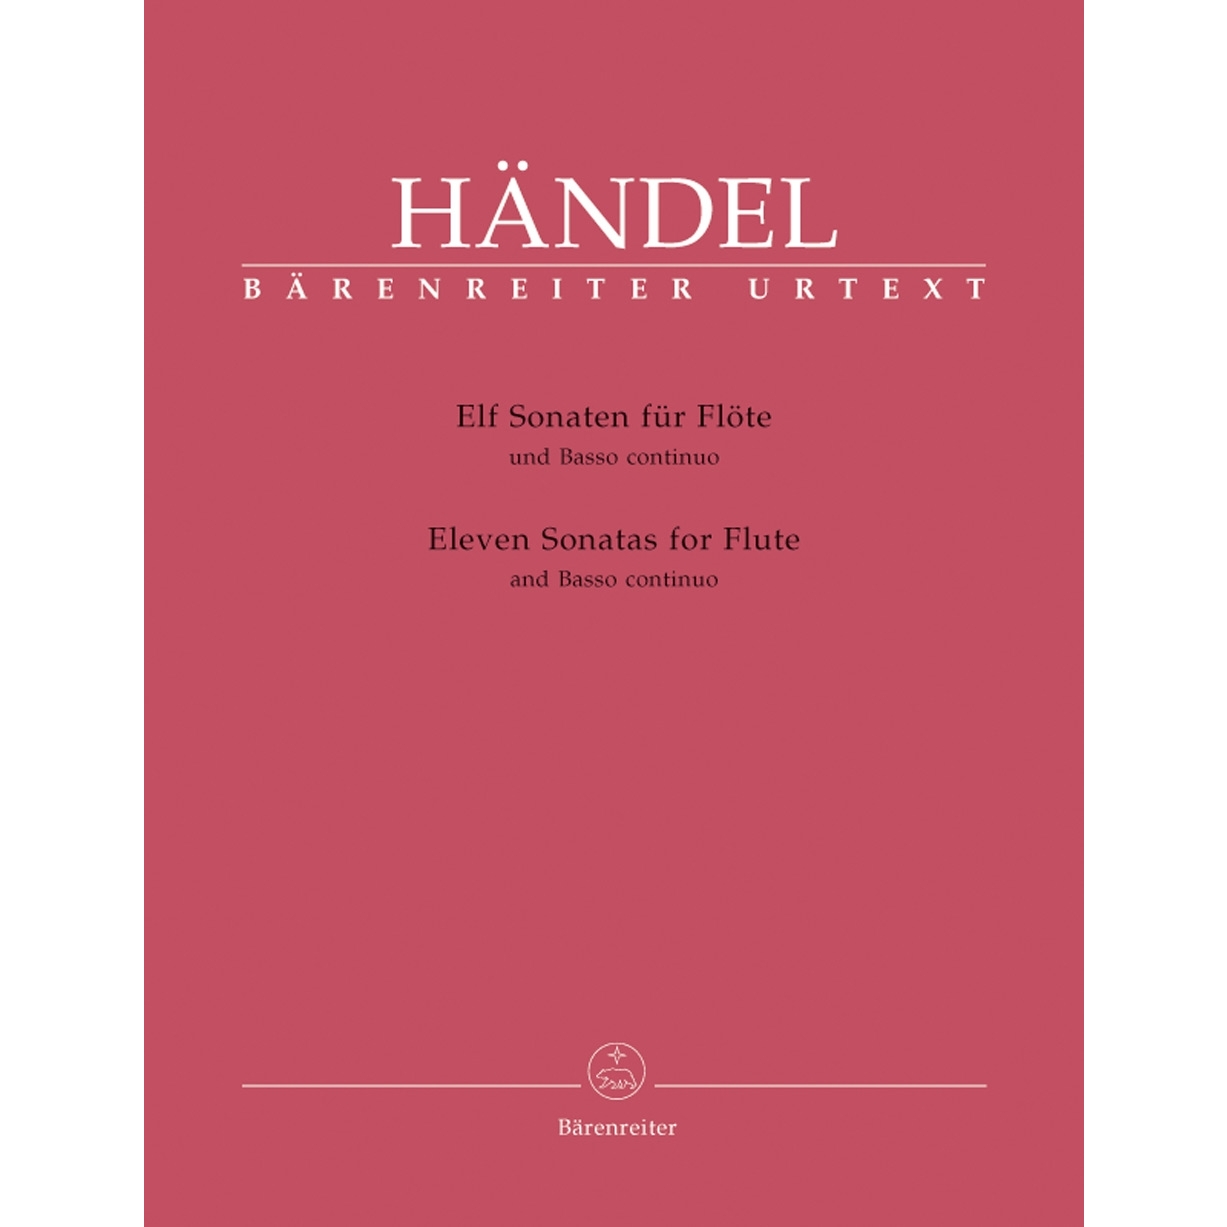 Eleven Sonatas for Flute and Basso Continuo, Op1 - G.F. Händel. Just Flutes